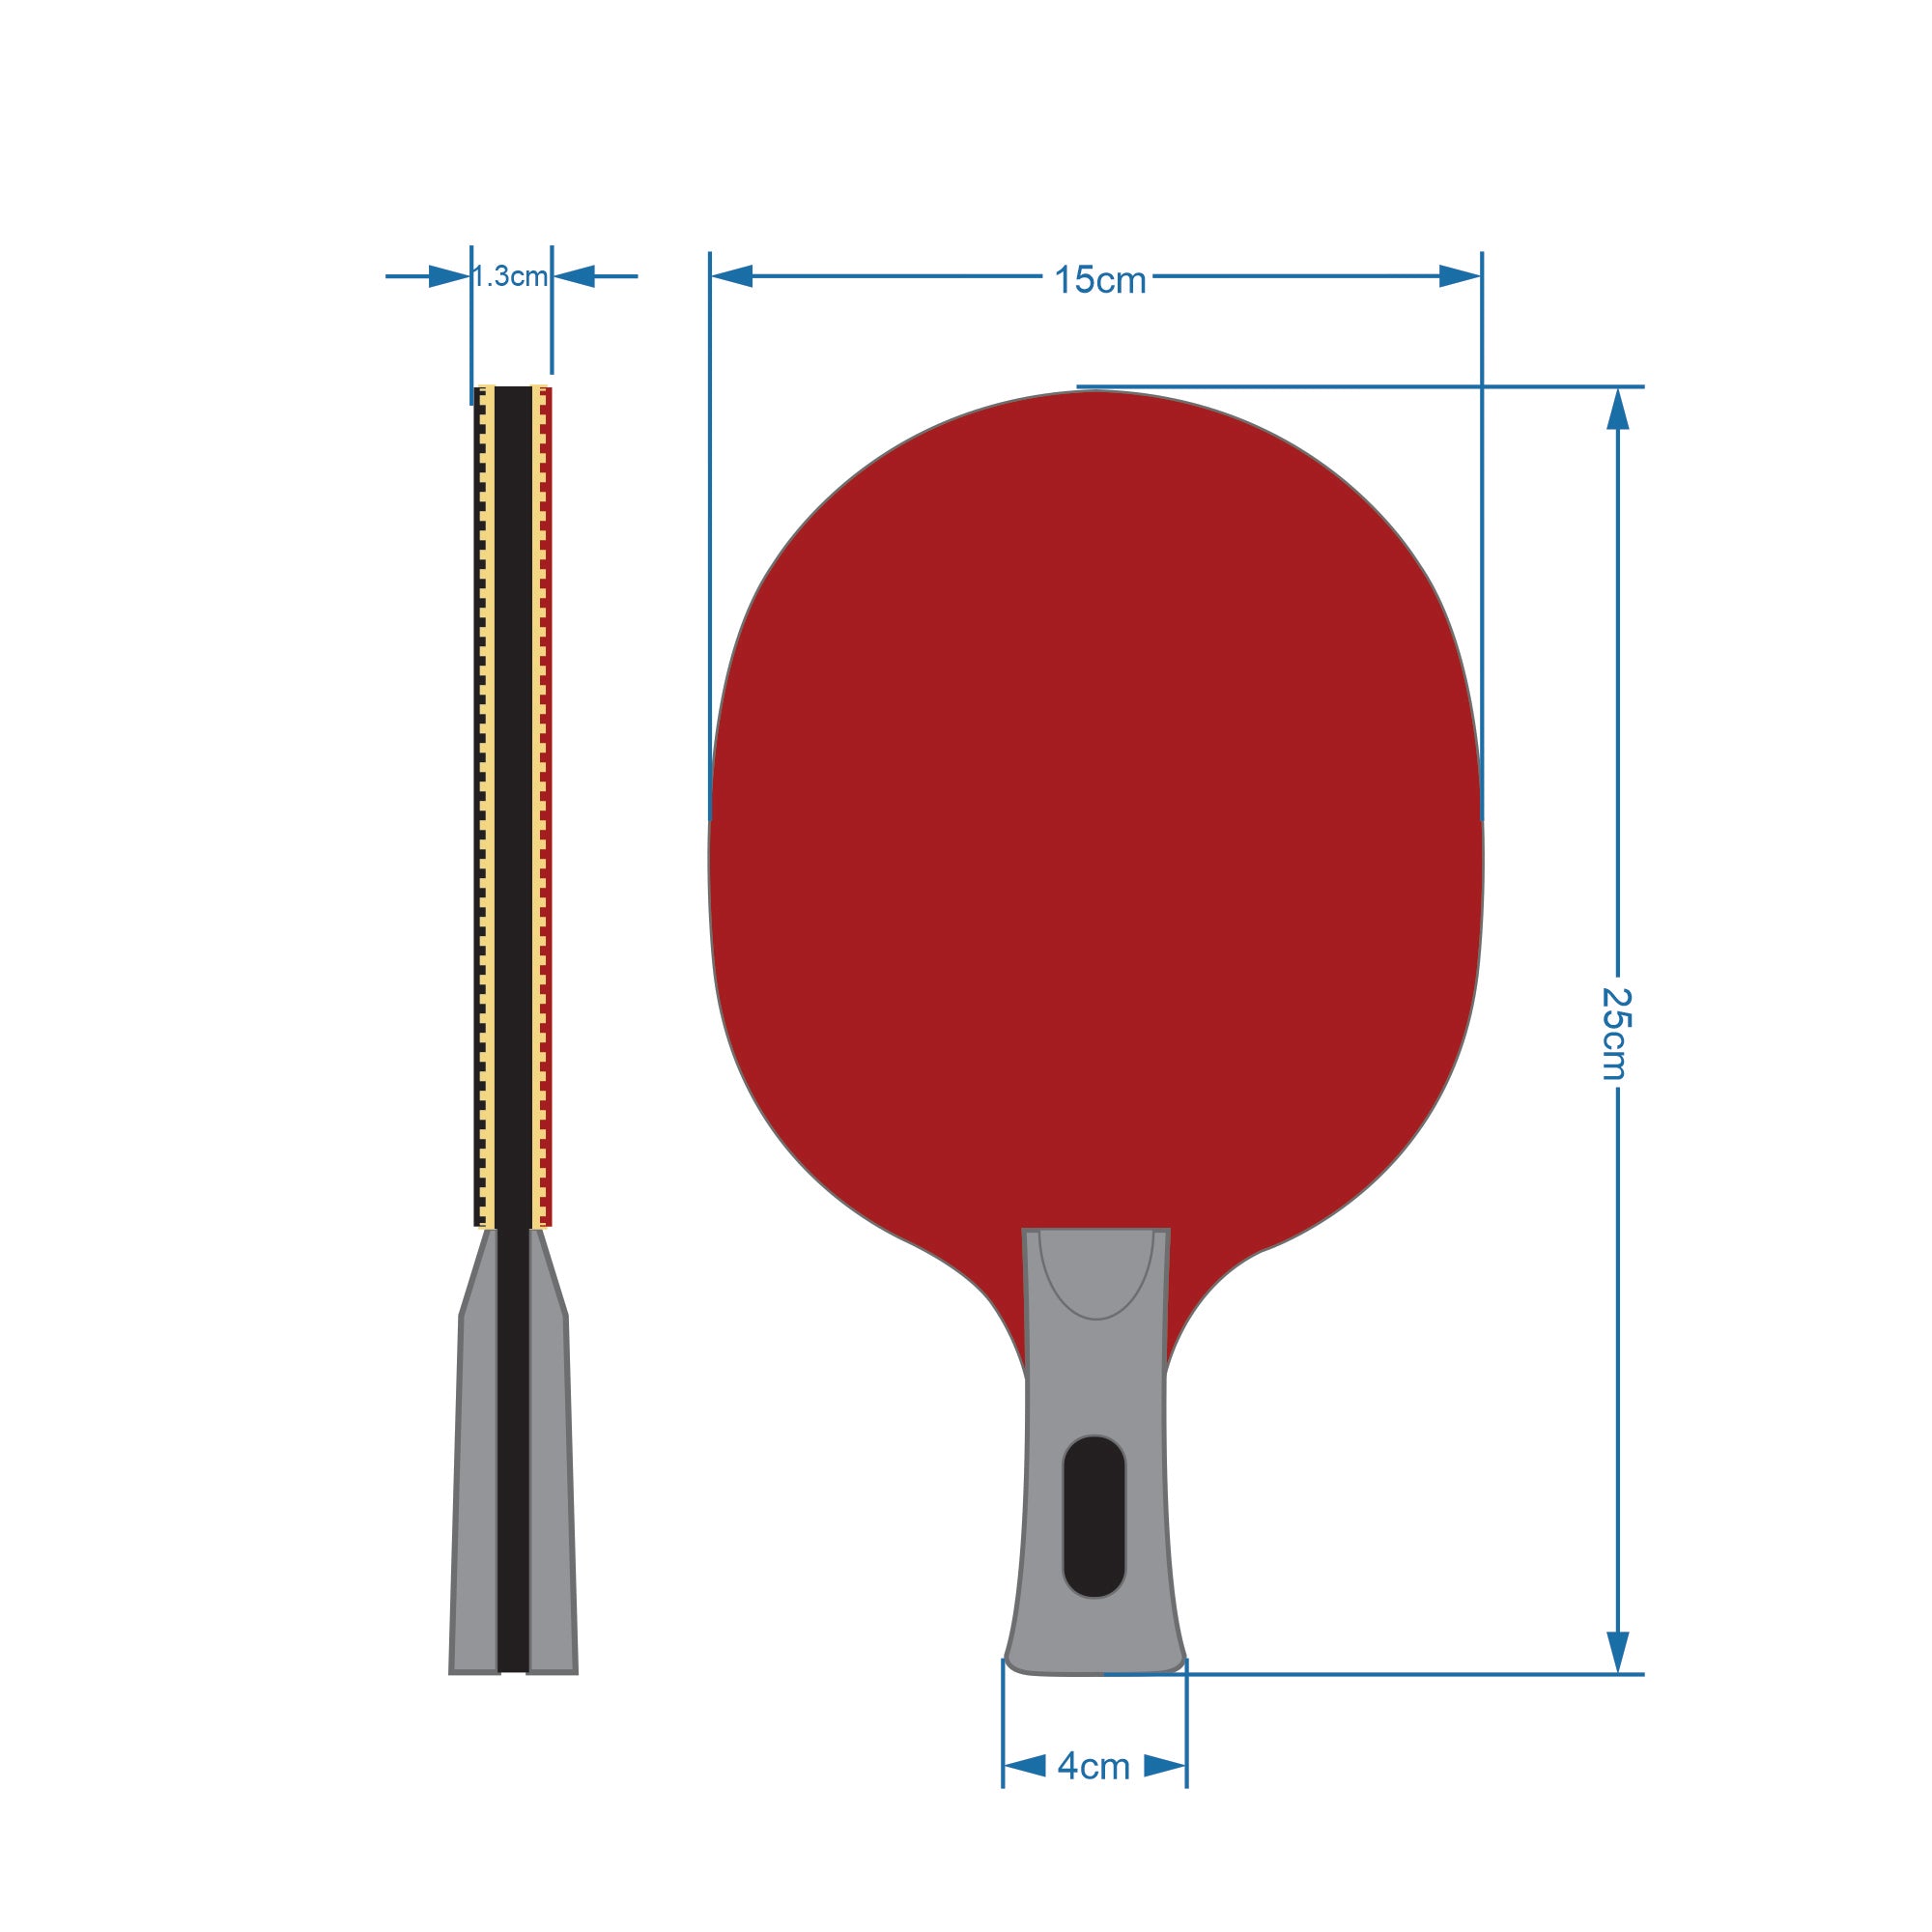 STAG Ninja power Advanced Series Table Tennis (T.T) Racquet| Pro Performance Training T.T Racquet With Deluxe Case